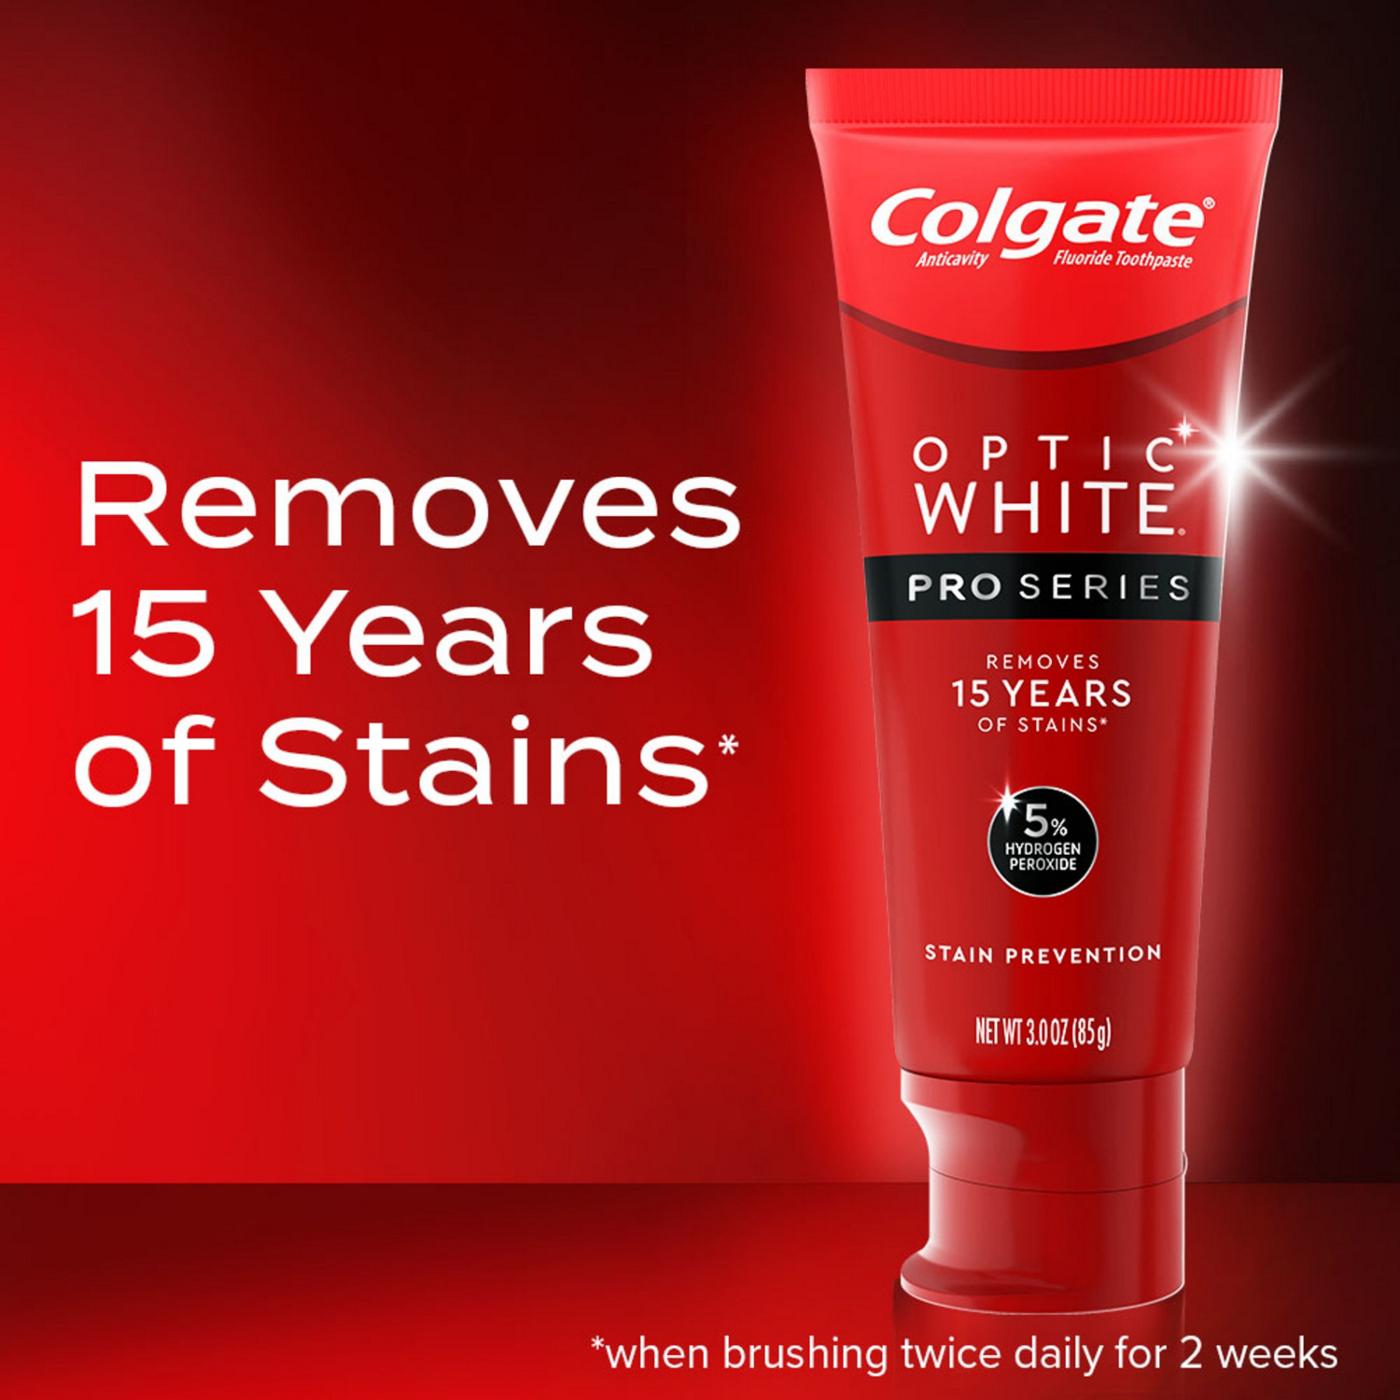 Colgate Optic White Pro Series Anticavity Toothpaste - Stain Prevention; image 2 of 10